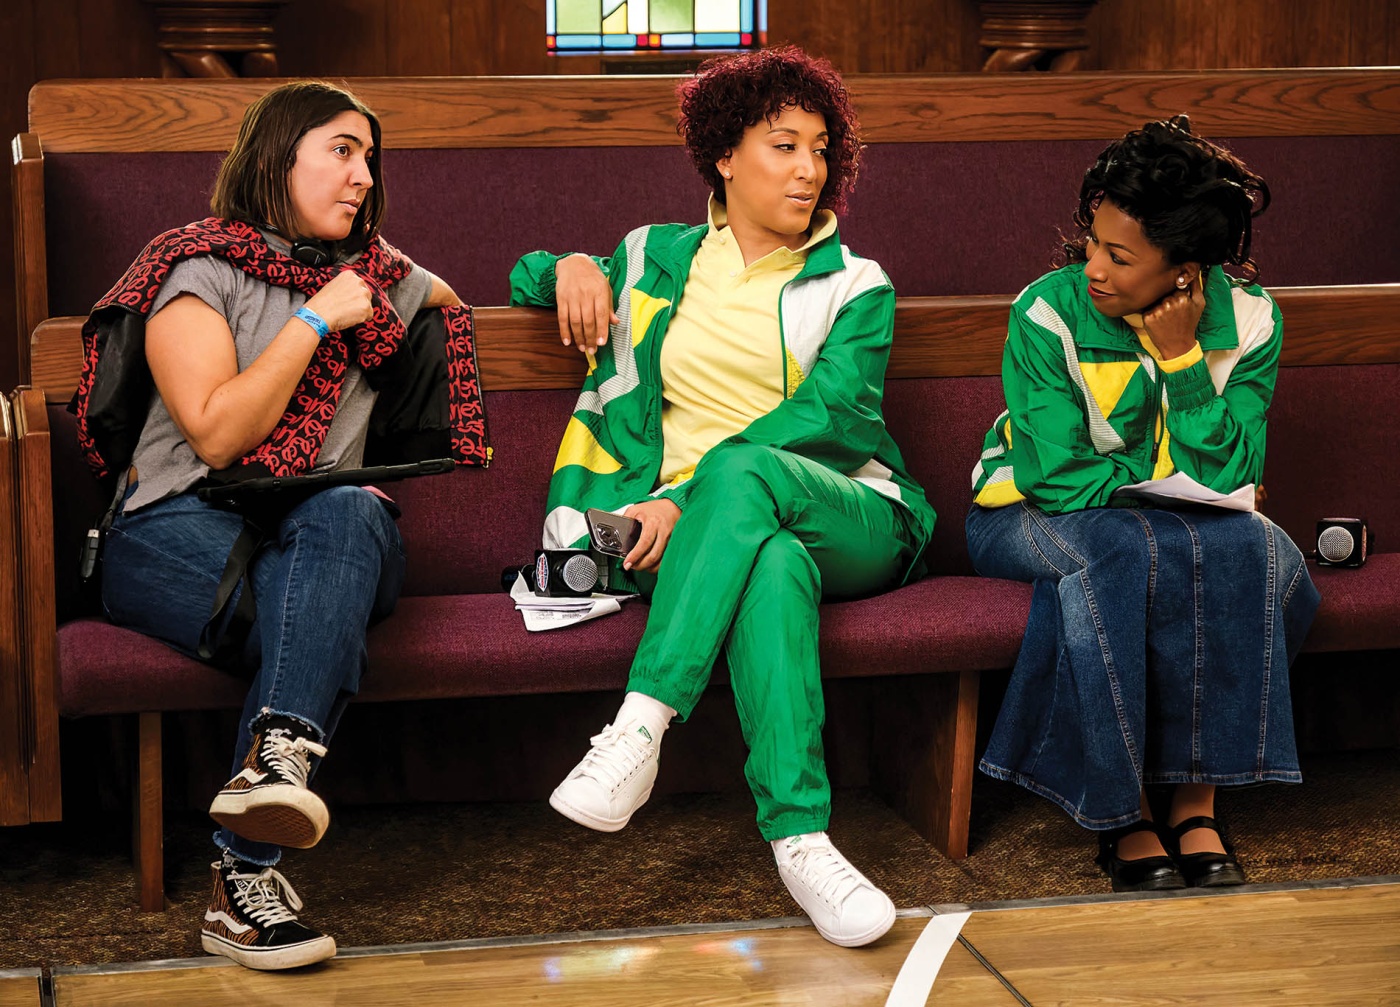 Image of Bridget Stokes on set; sitting with Robin Thede and Gabrielle Dennis on a bench.